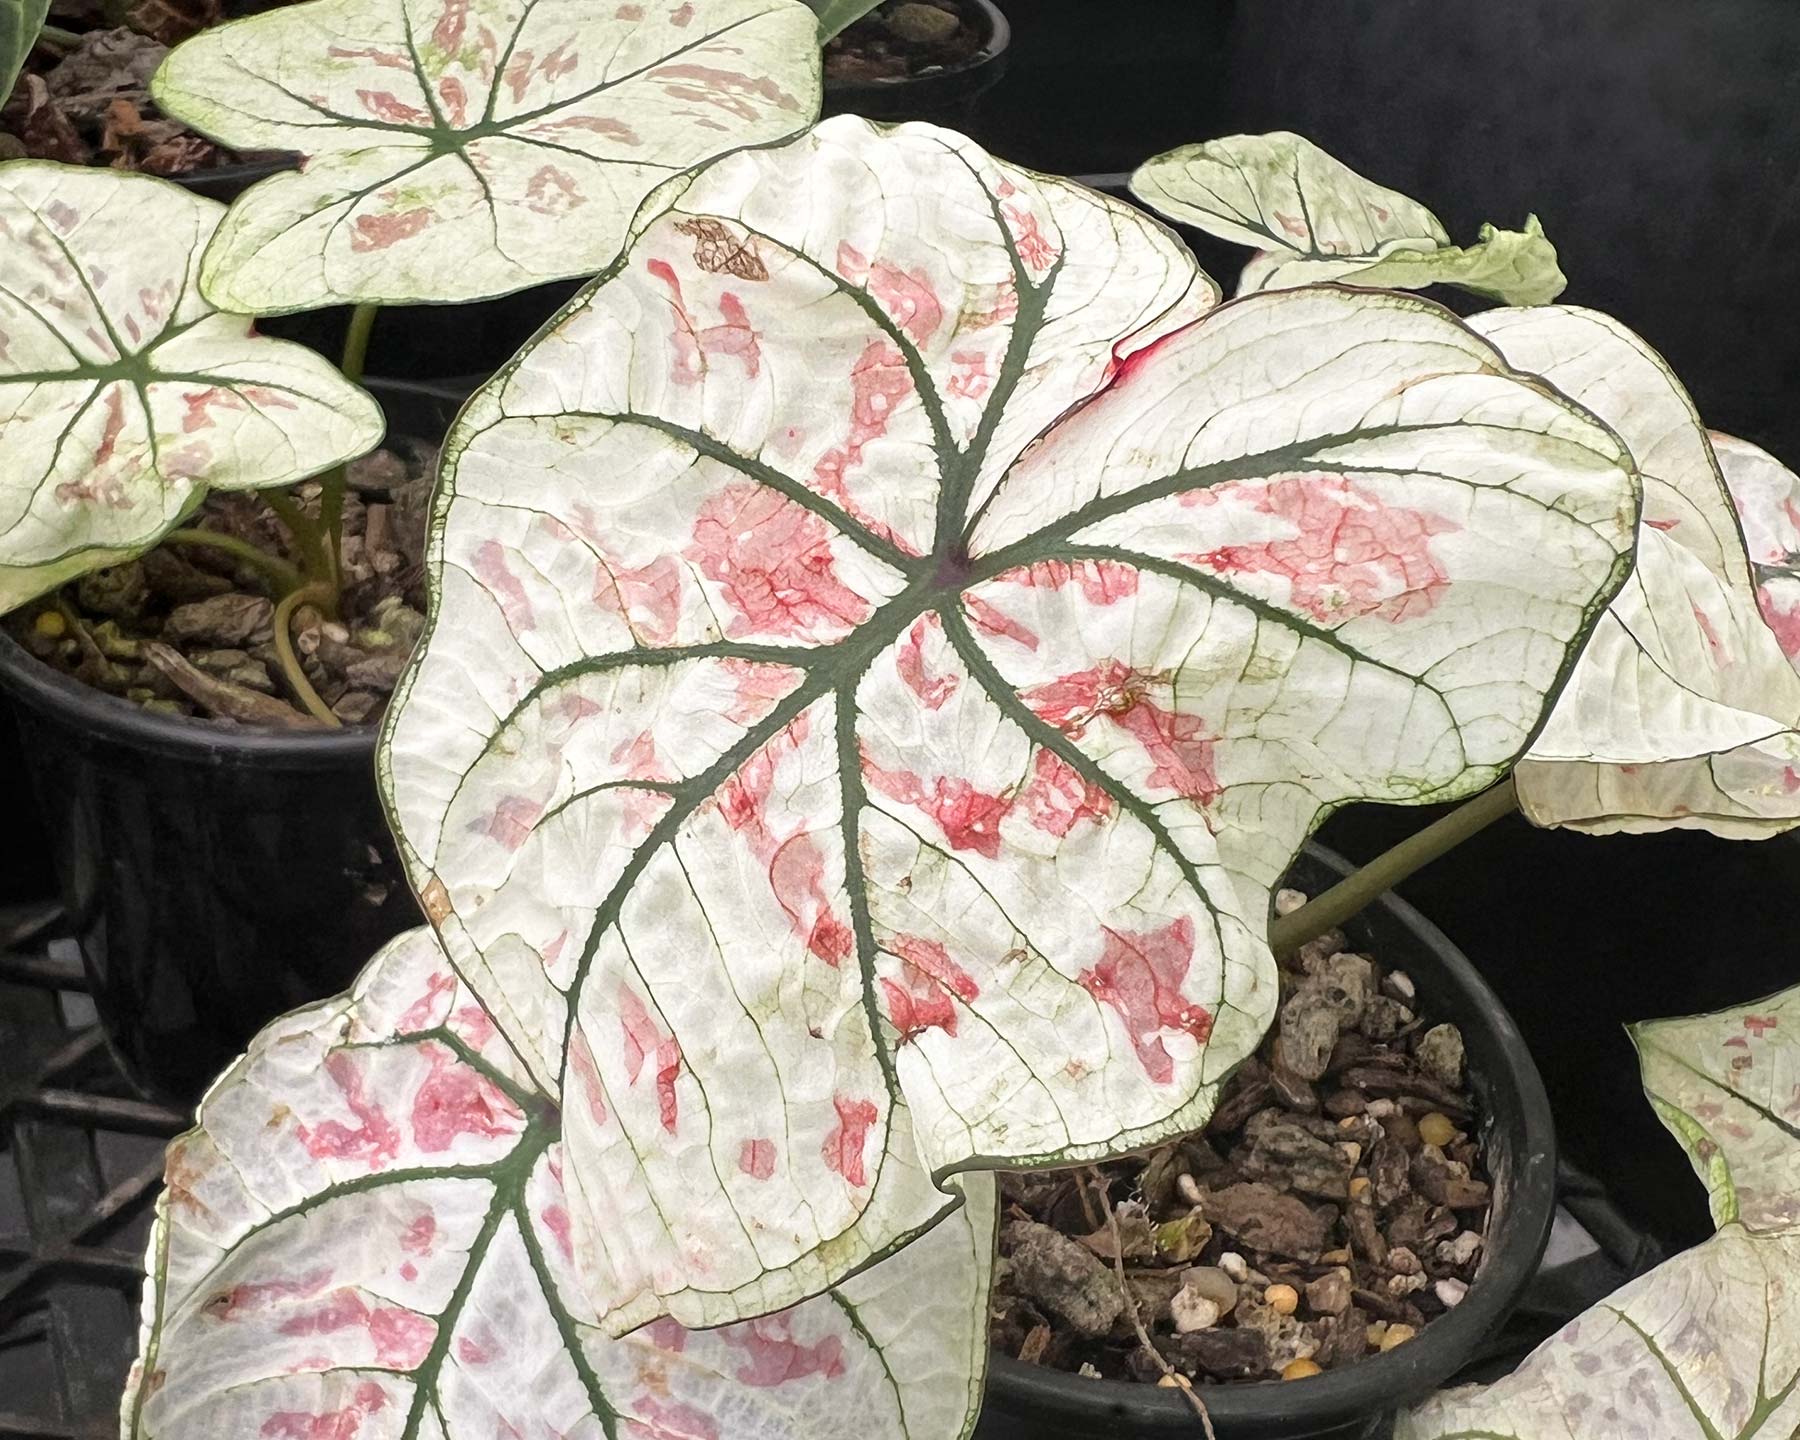 Caladium 'Strawberry Star' - pale green leaves with pink blotches and deep green veins